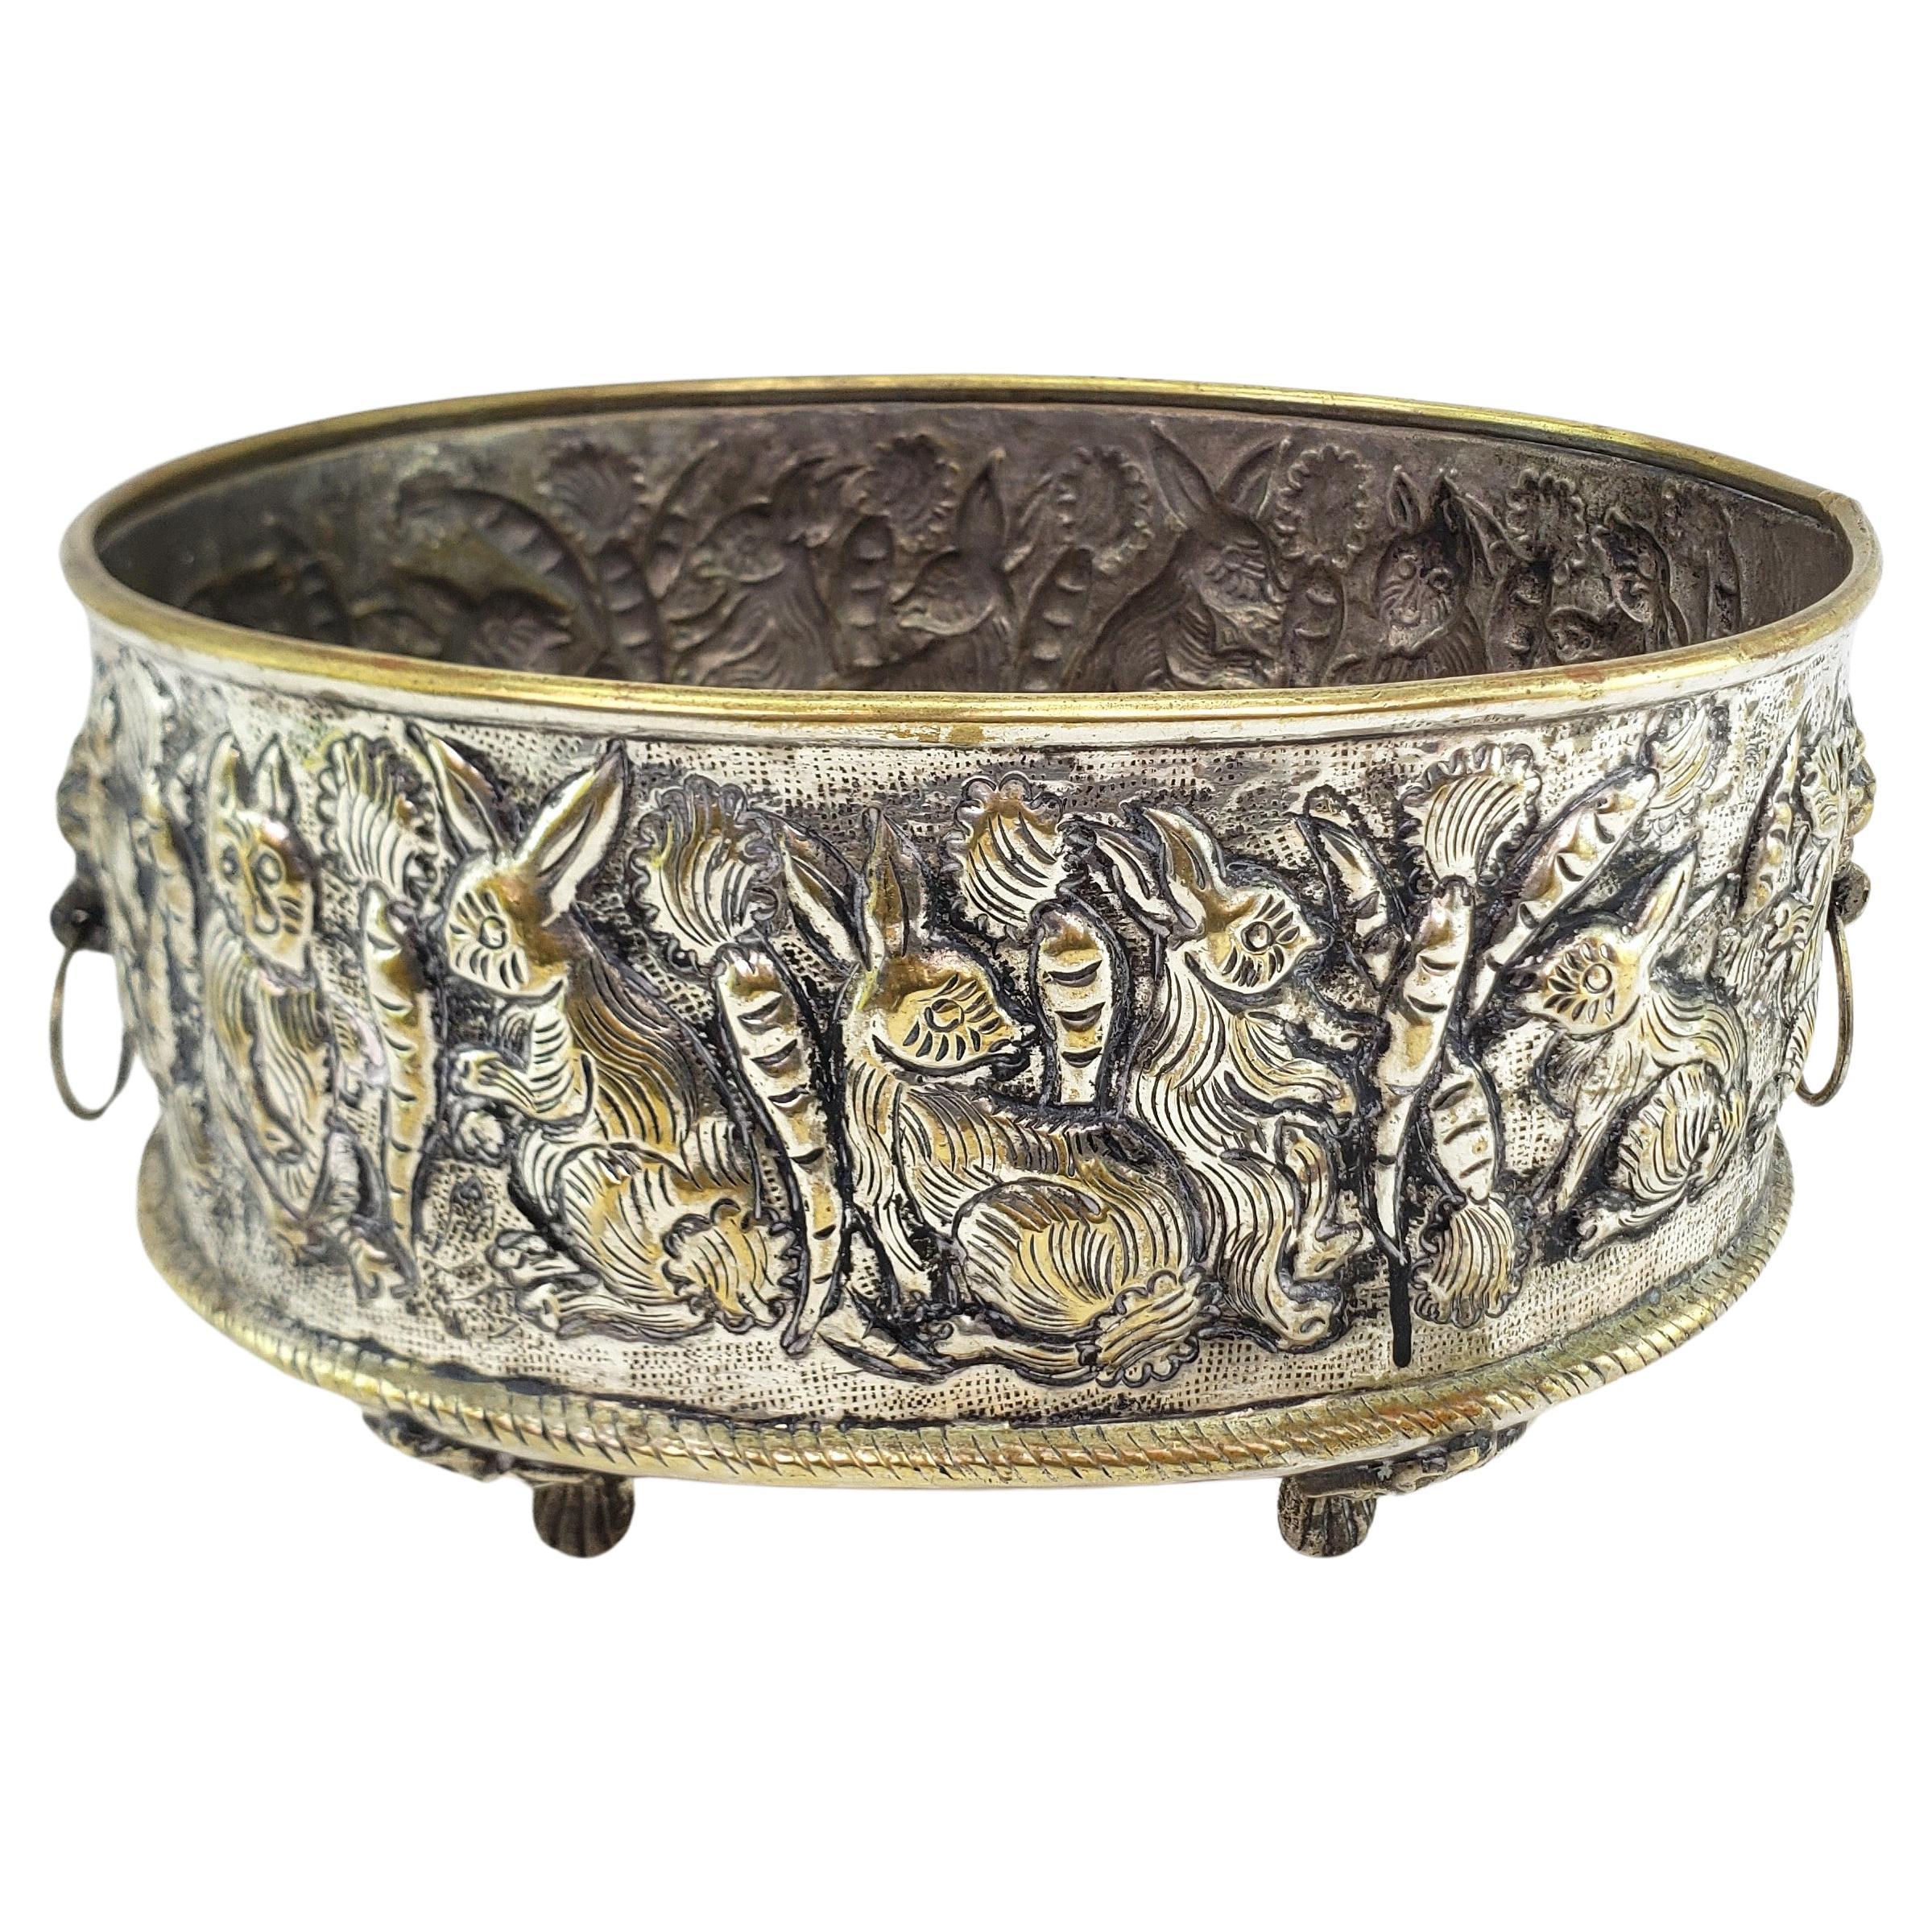 Antique English Hand-Crafted Plated Brass Planter with Whimsical Rabbits For Sale